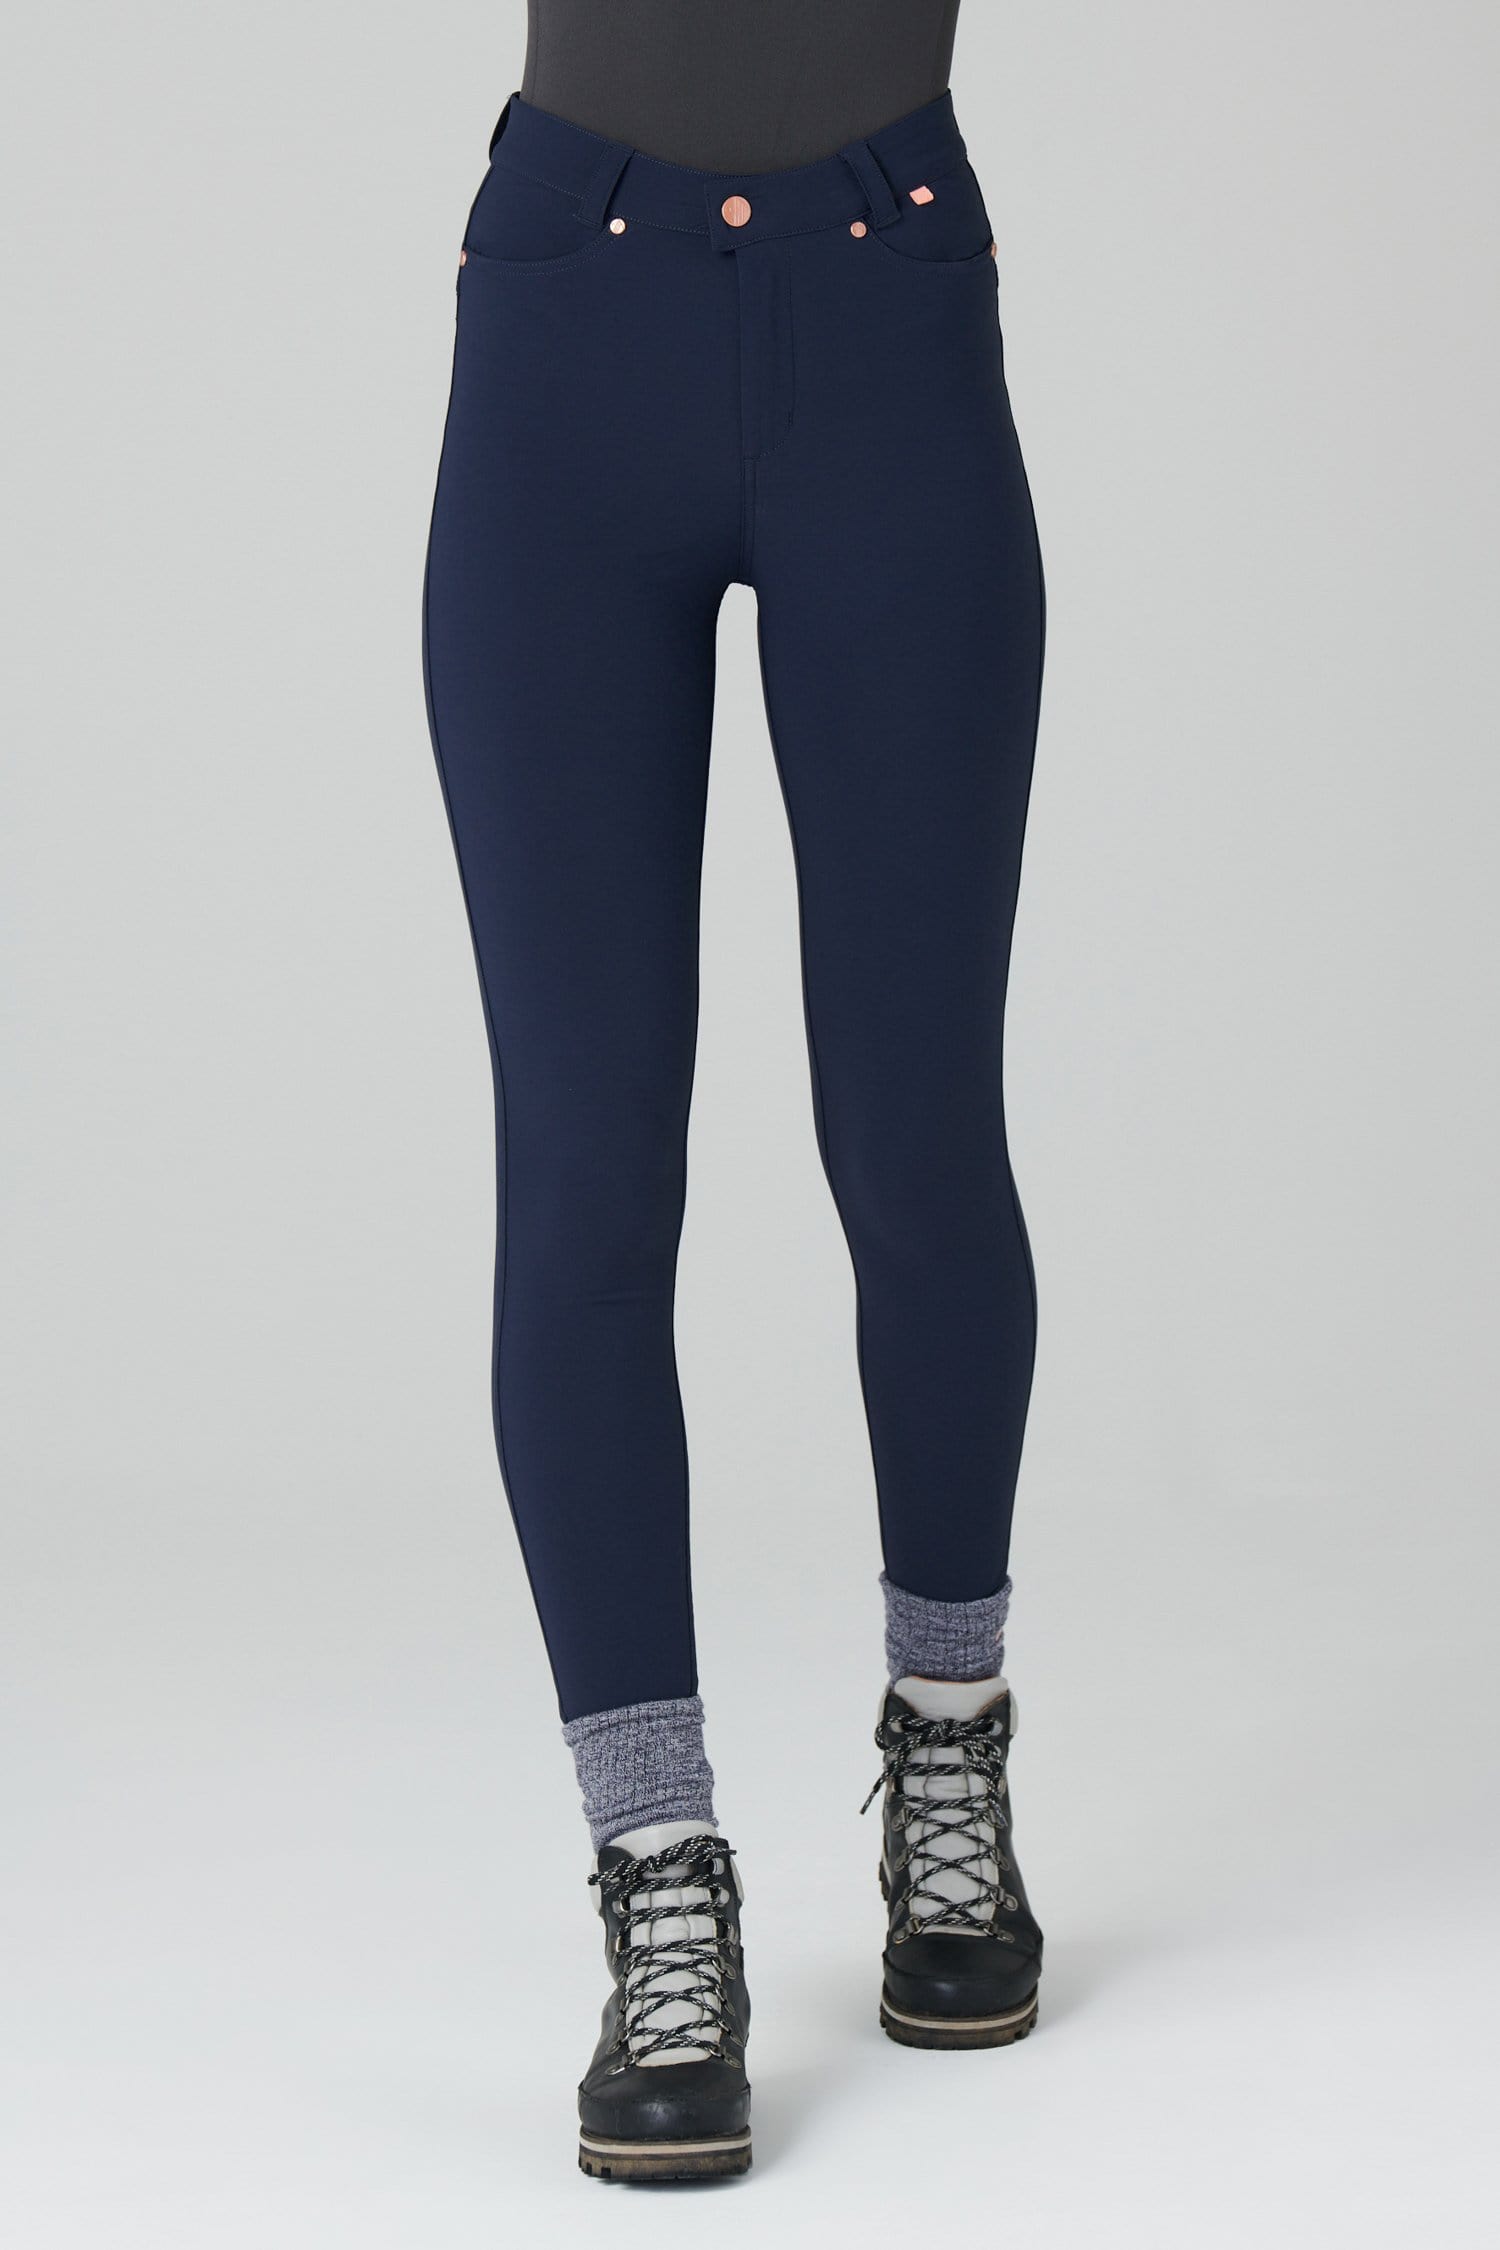 Max Stretch Skinny Outdoor Trousers - Deep Navy - 36l / Uk18 - Womens - Acai Outdoorwear